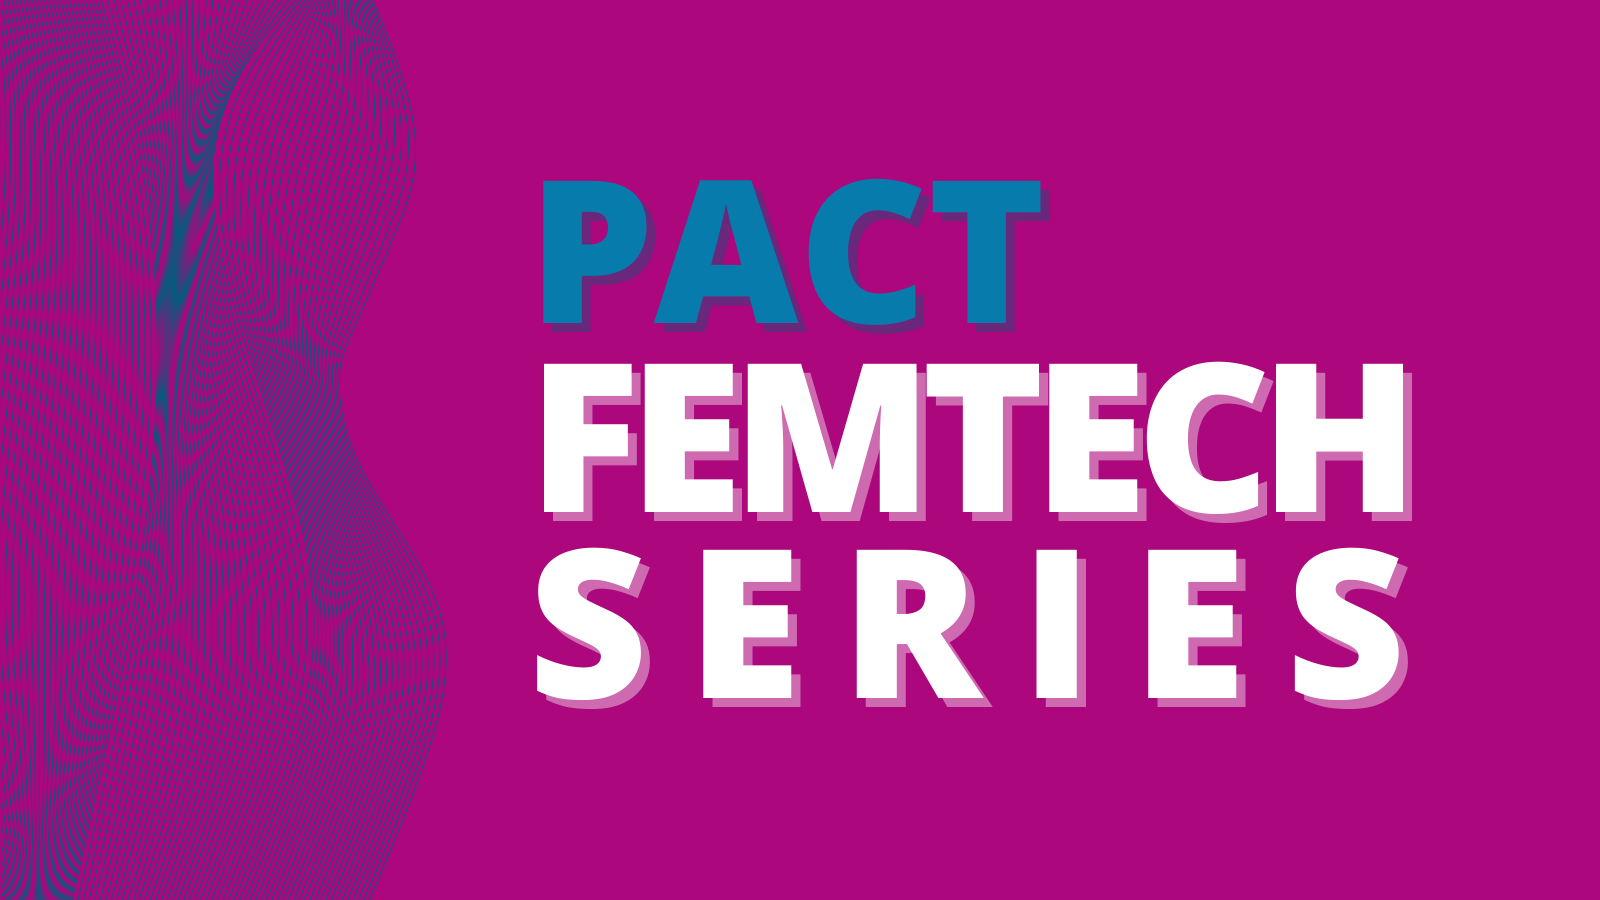 Shares the logo of the PACT FemTech series